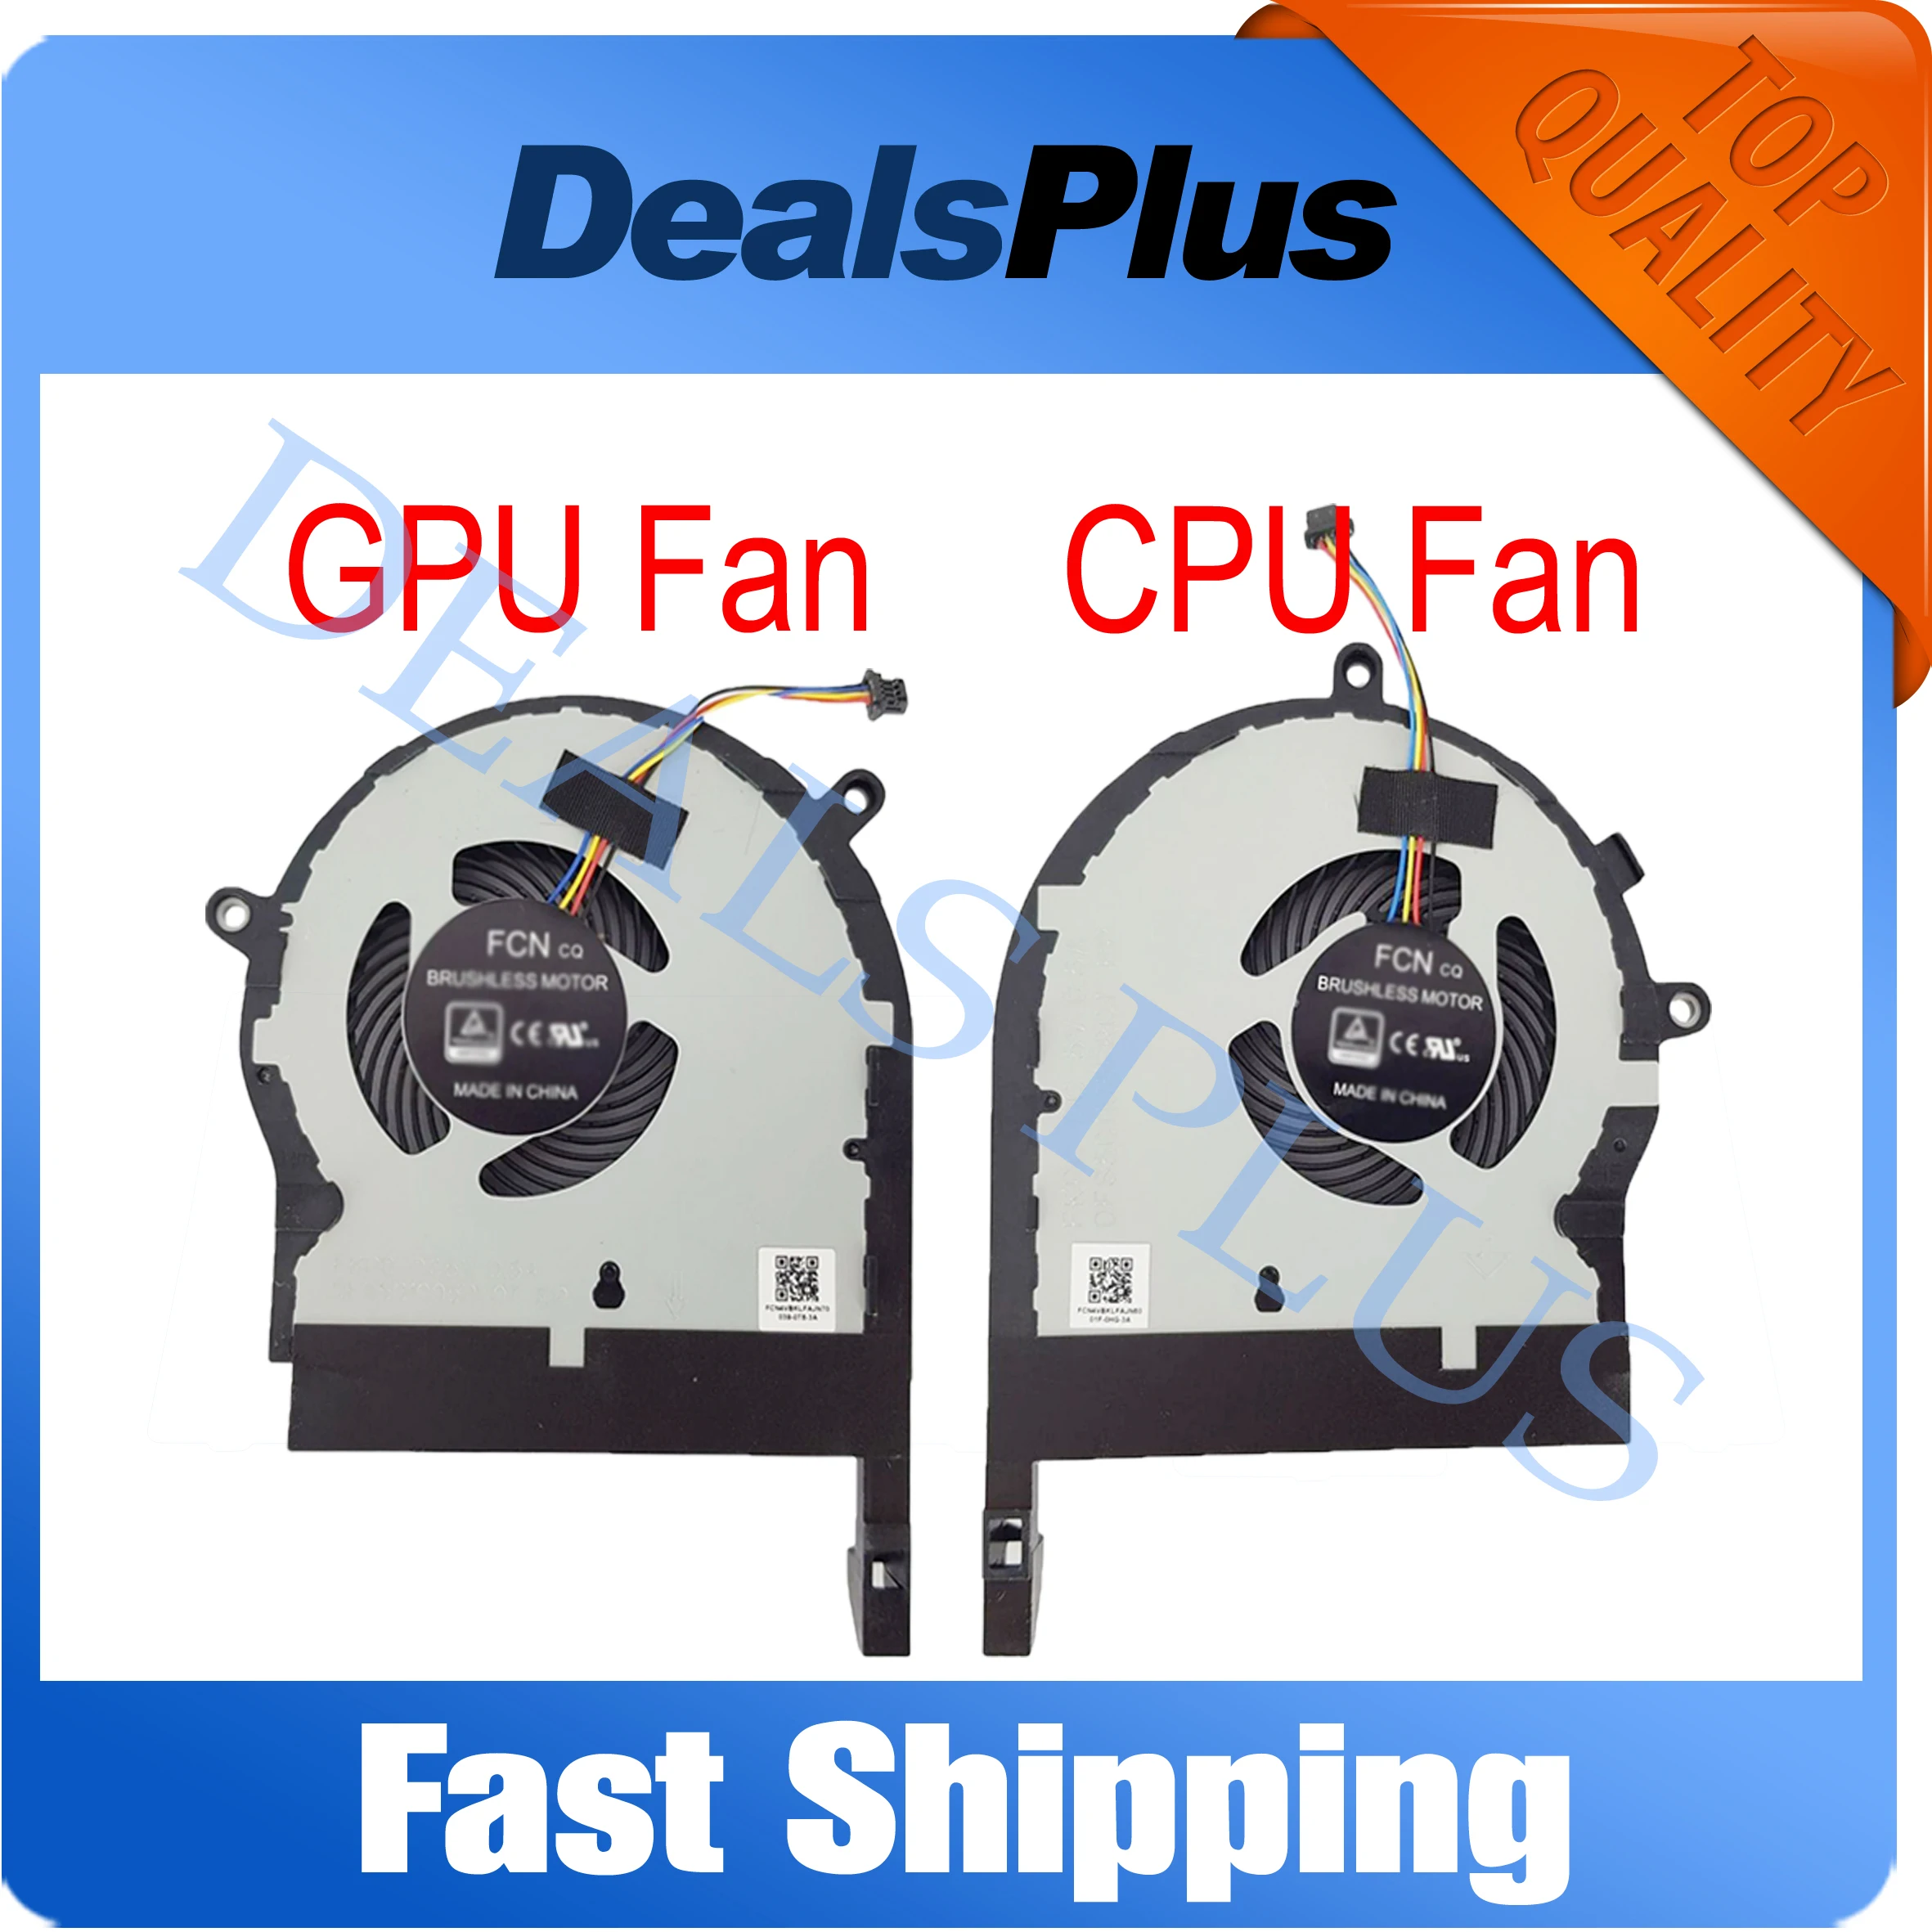 

New Replace CPU GPU Cooling Fan For ASUS TUF Gaming FX504 FX504G FX504GE FX504GM FX504GD FX504FE FX80 FX80G FX80GE FX80GM FX80GD